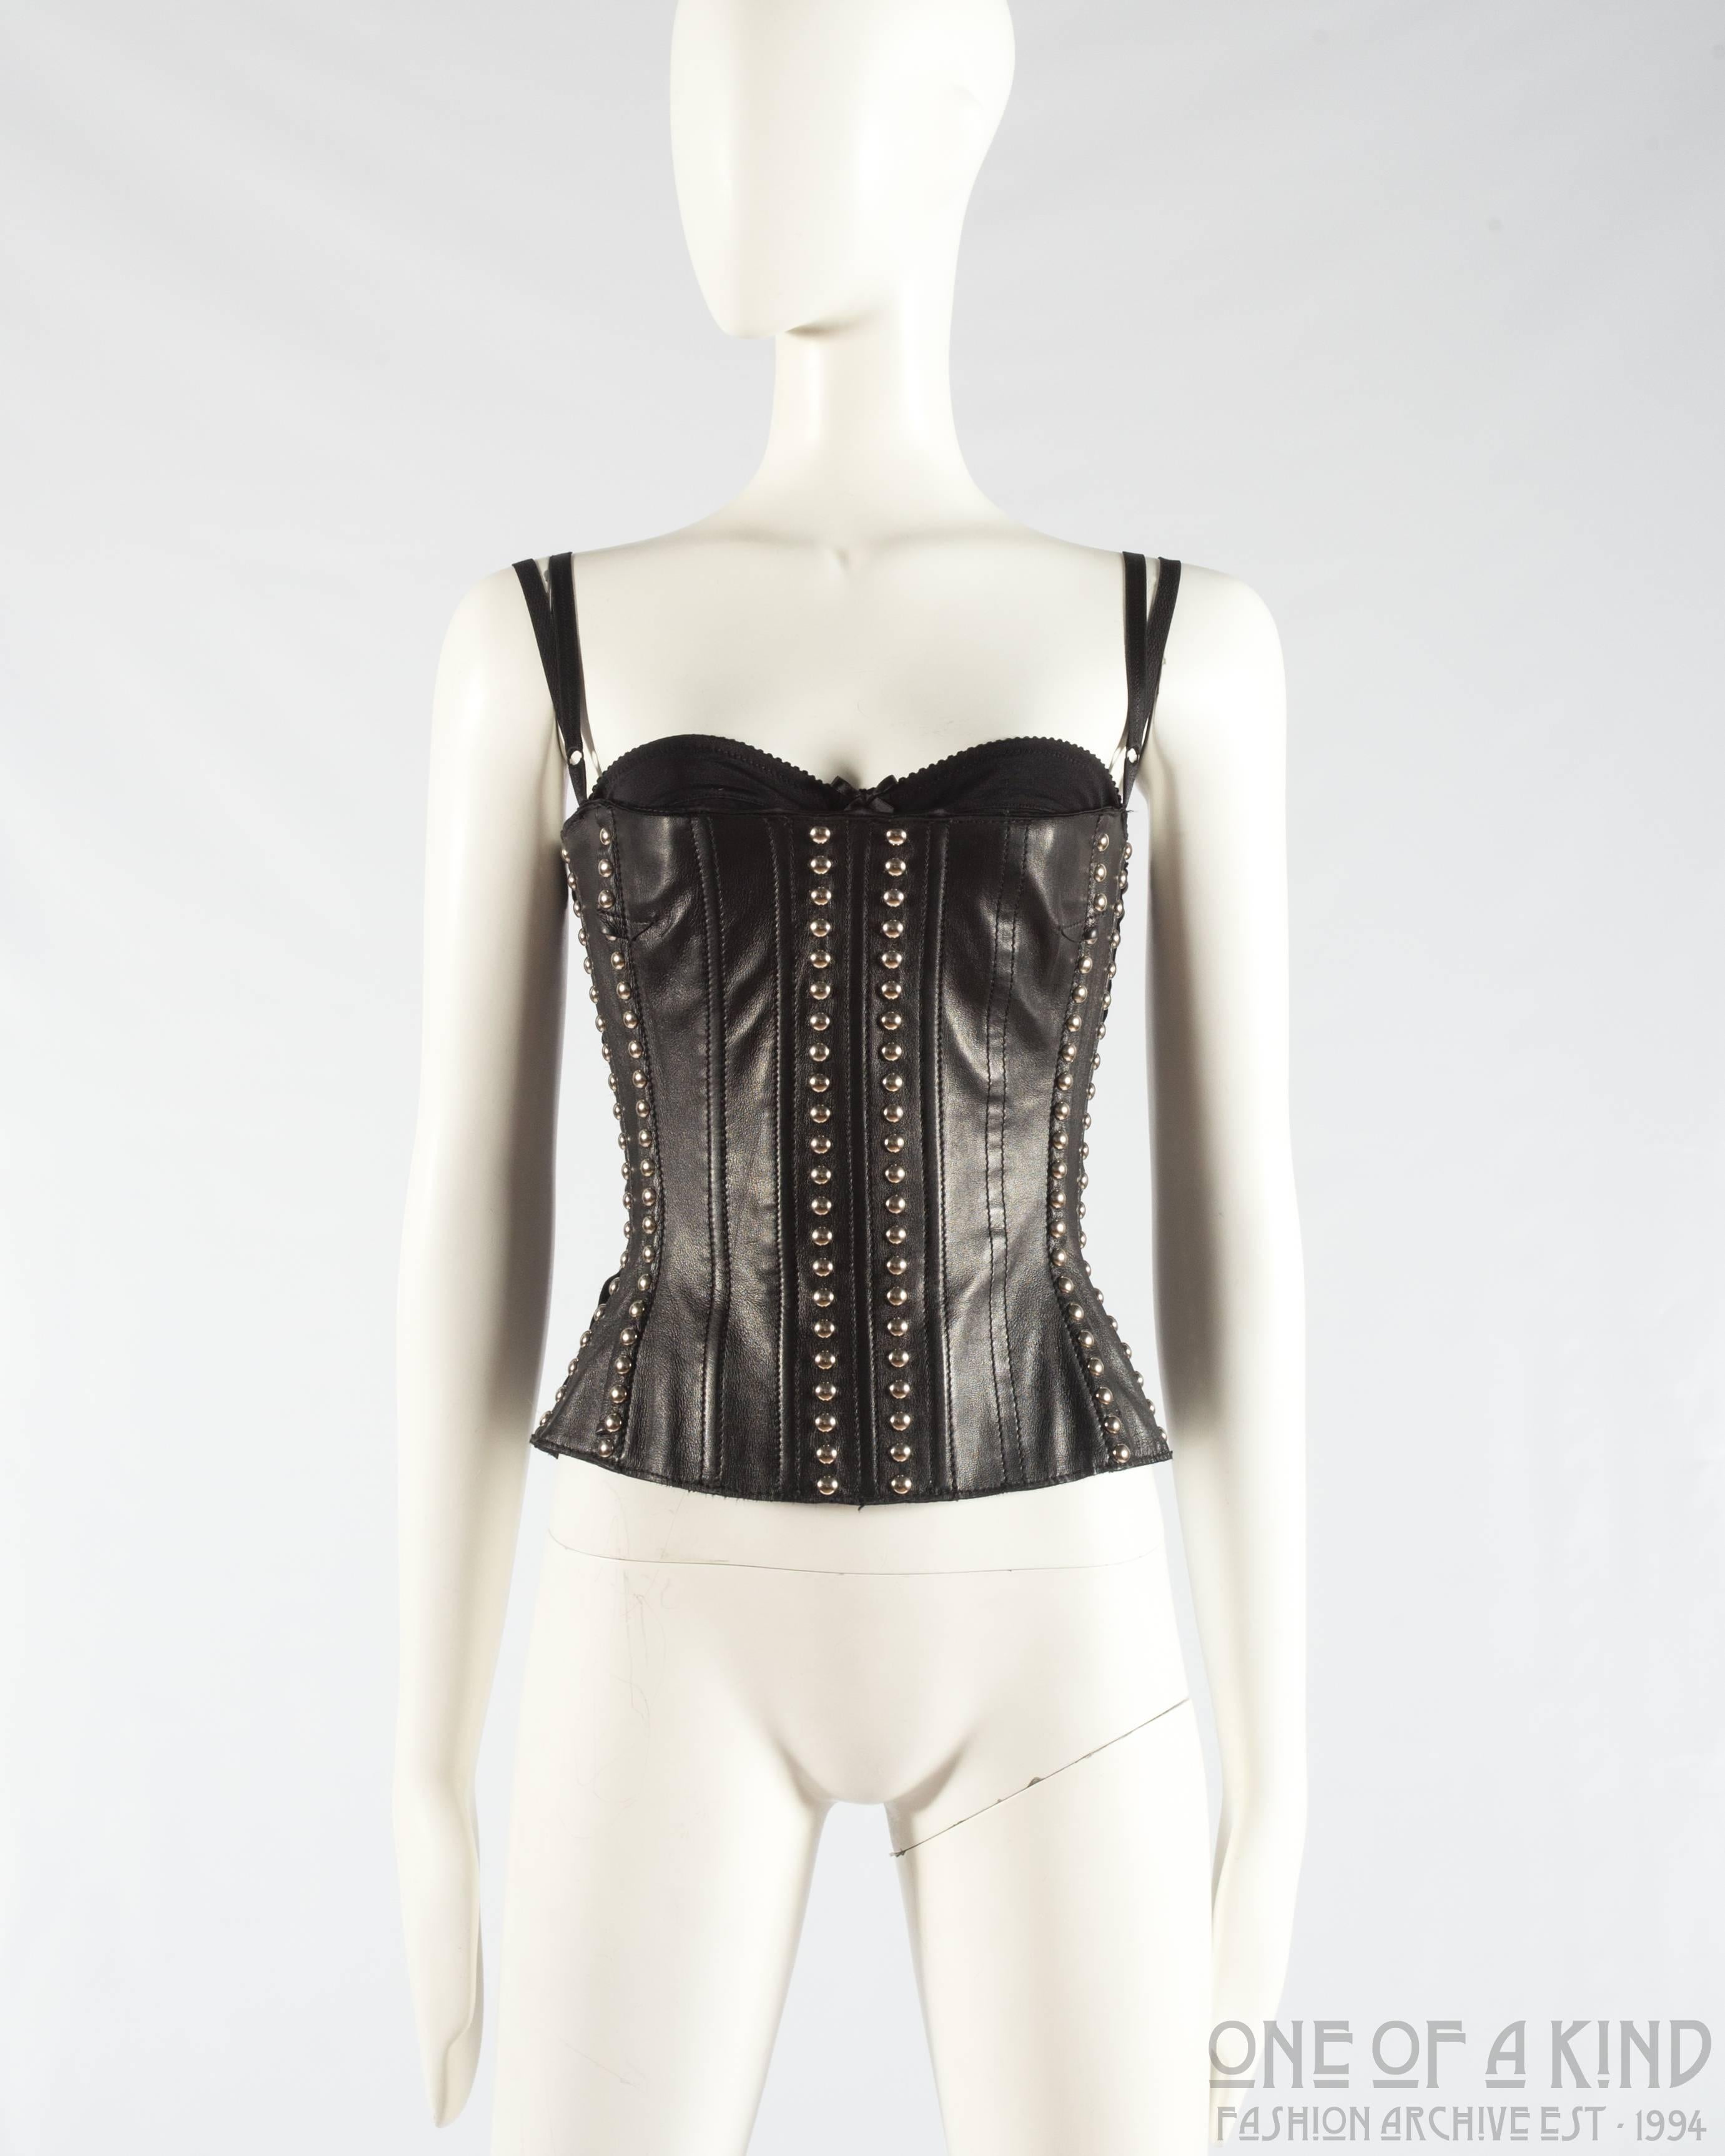 Dolce & Gabbana black leather corset with silver studs 

- internal bra with adjustable straps 
- boned corset 
- silver metal zip closure on centre back

Spring-Summer 2000